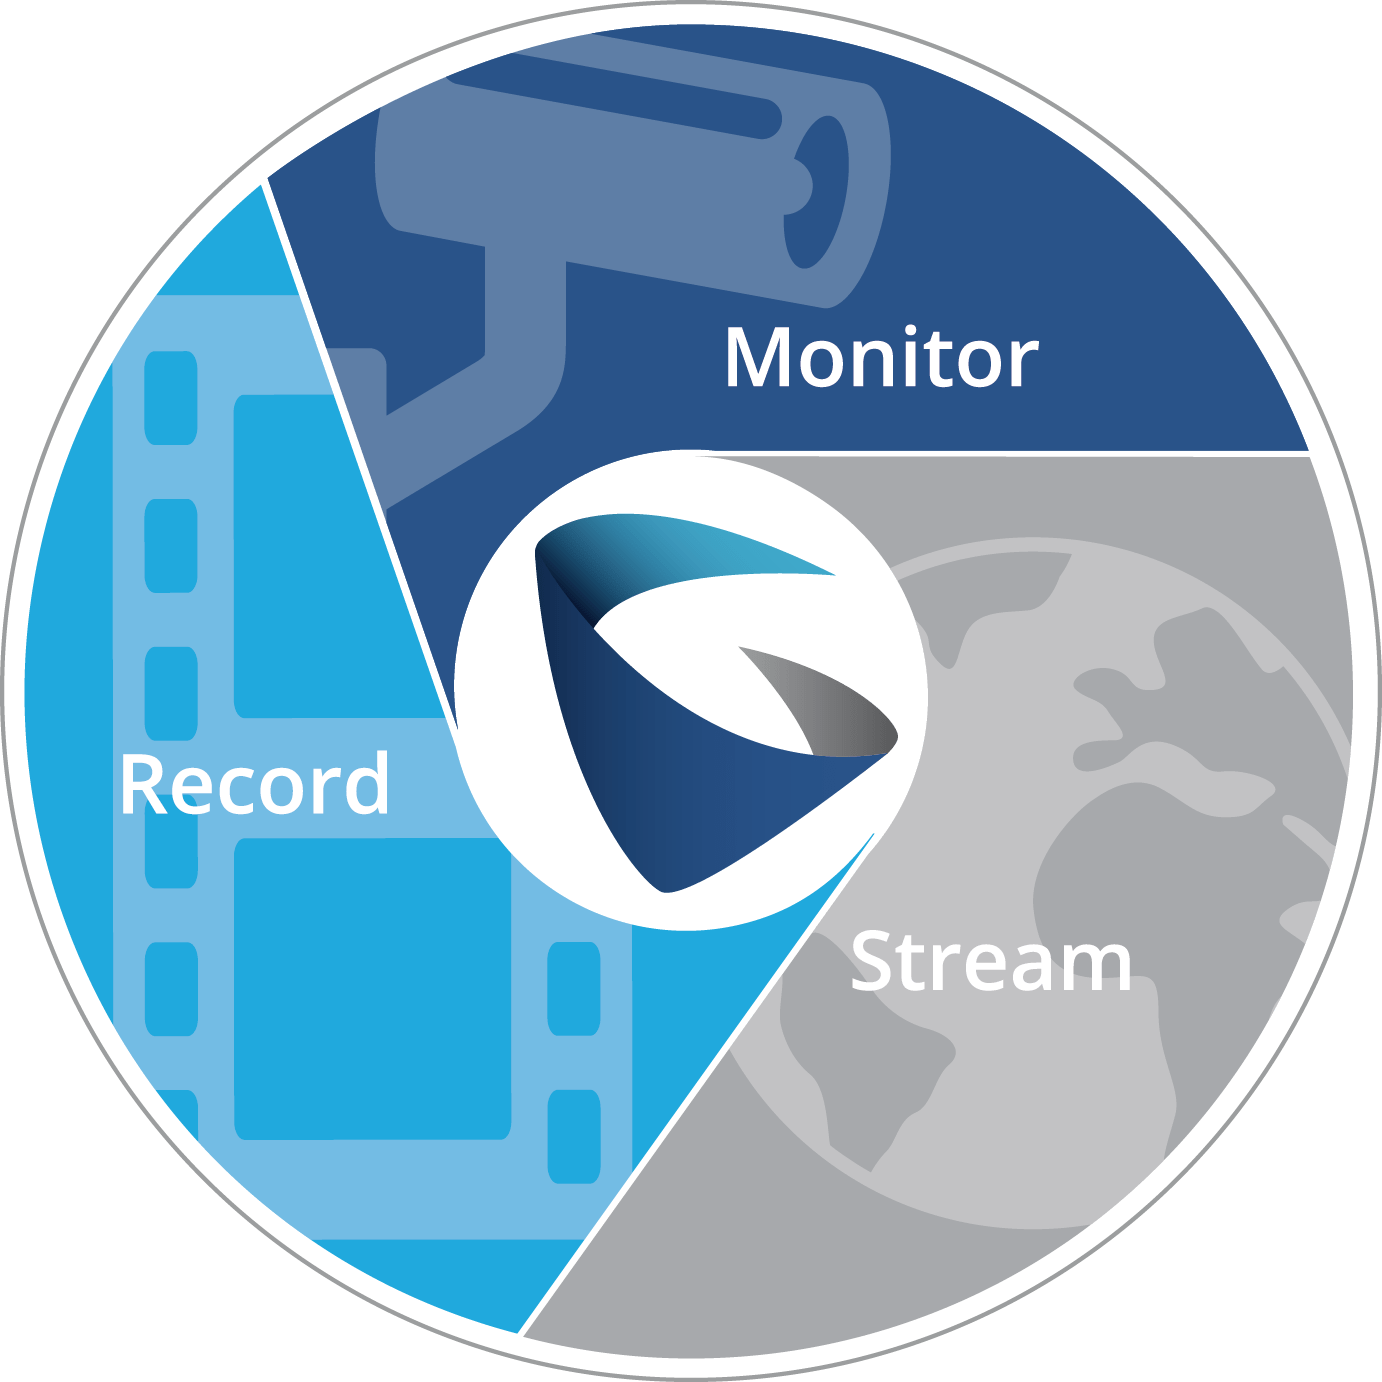 image of surveillance logo including monitor, record, and stream in grandstream device